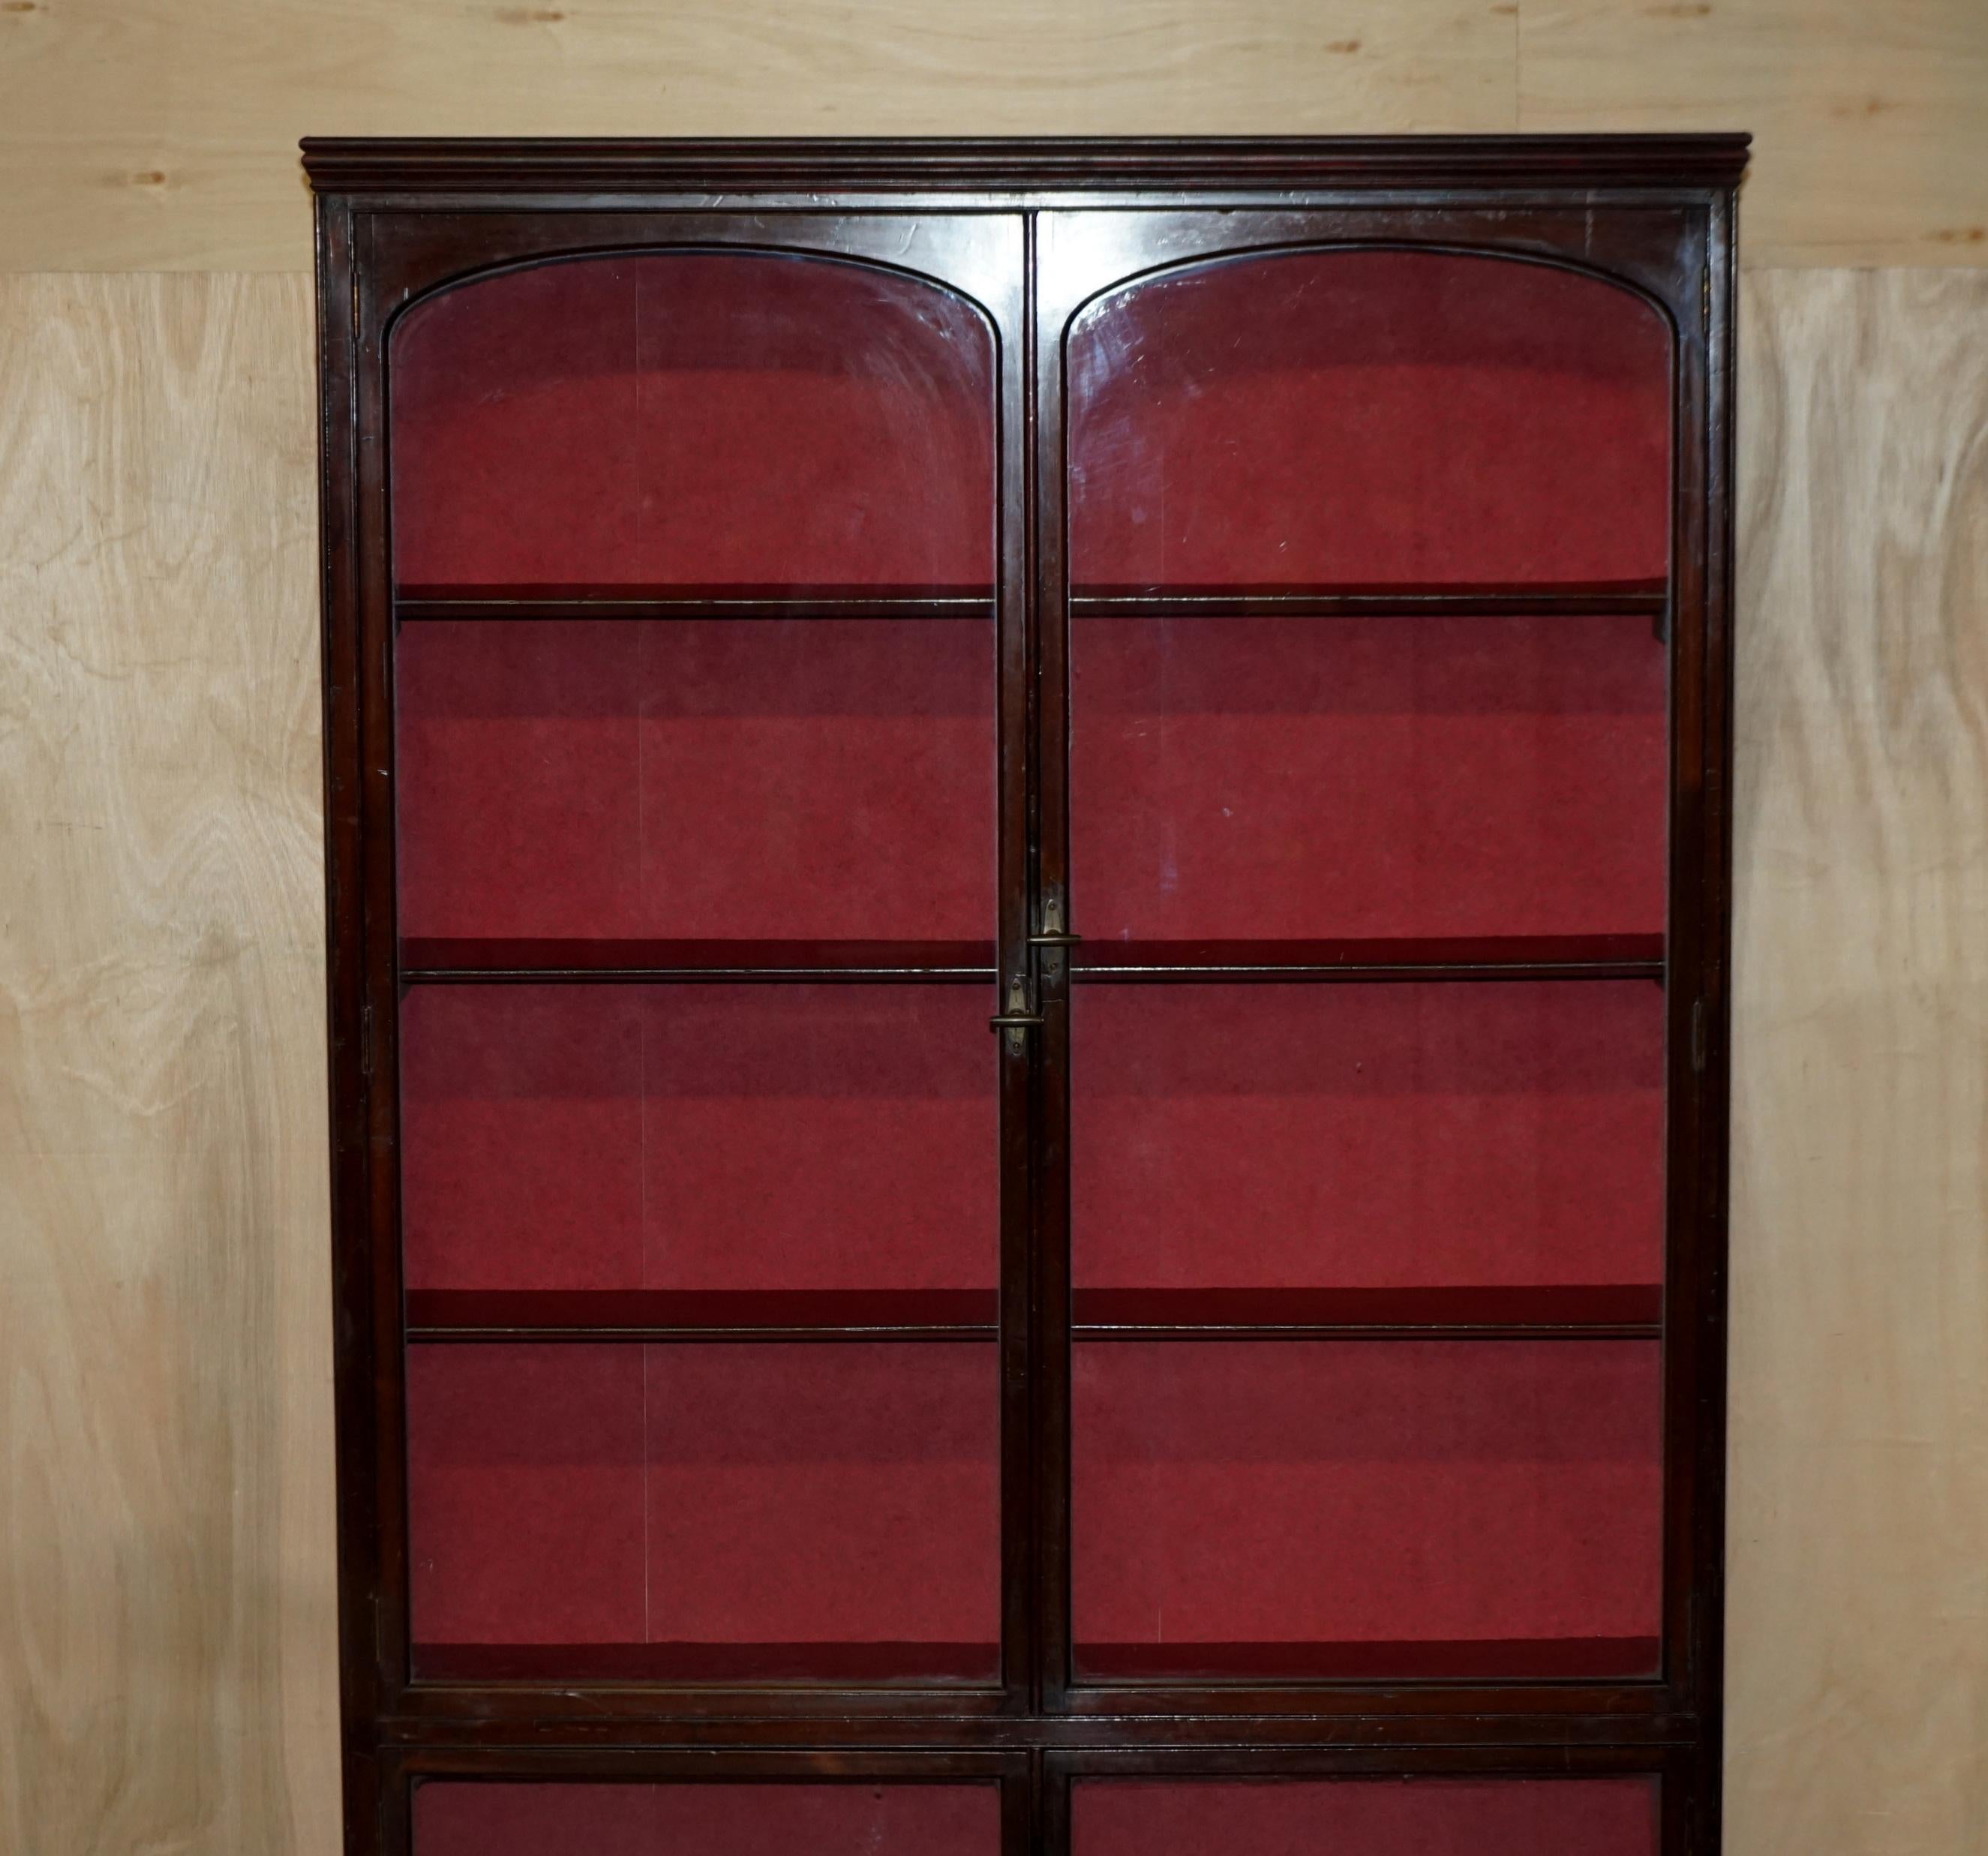 High Victorian LARGE VICTORIAN HABERDASHERY APOTHECARY SHOPS CABiNET GLAZED DOOR BOOKCASE For Sale